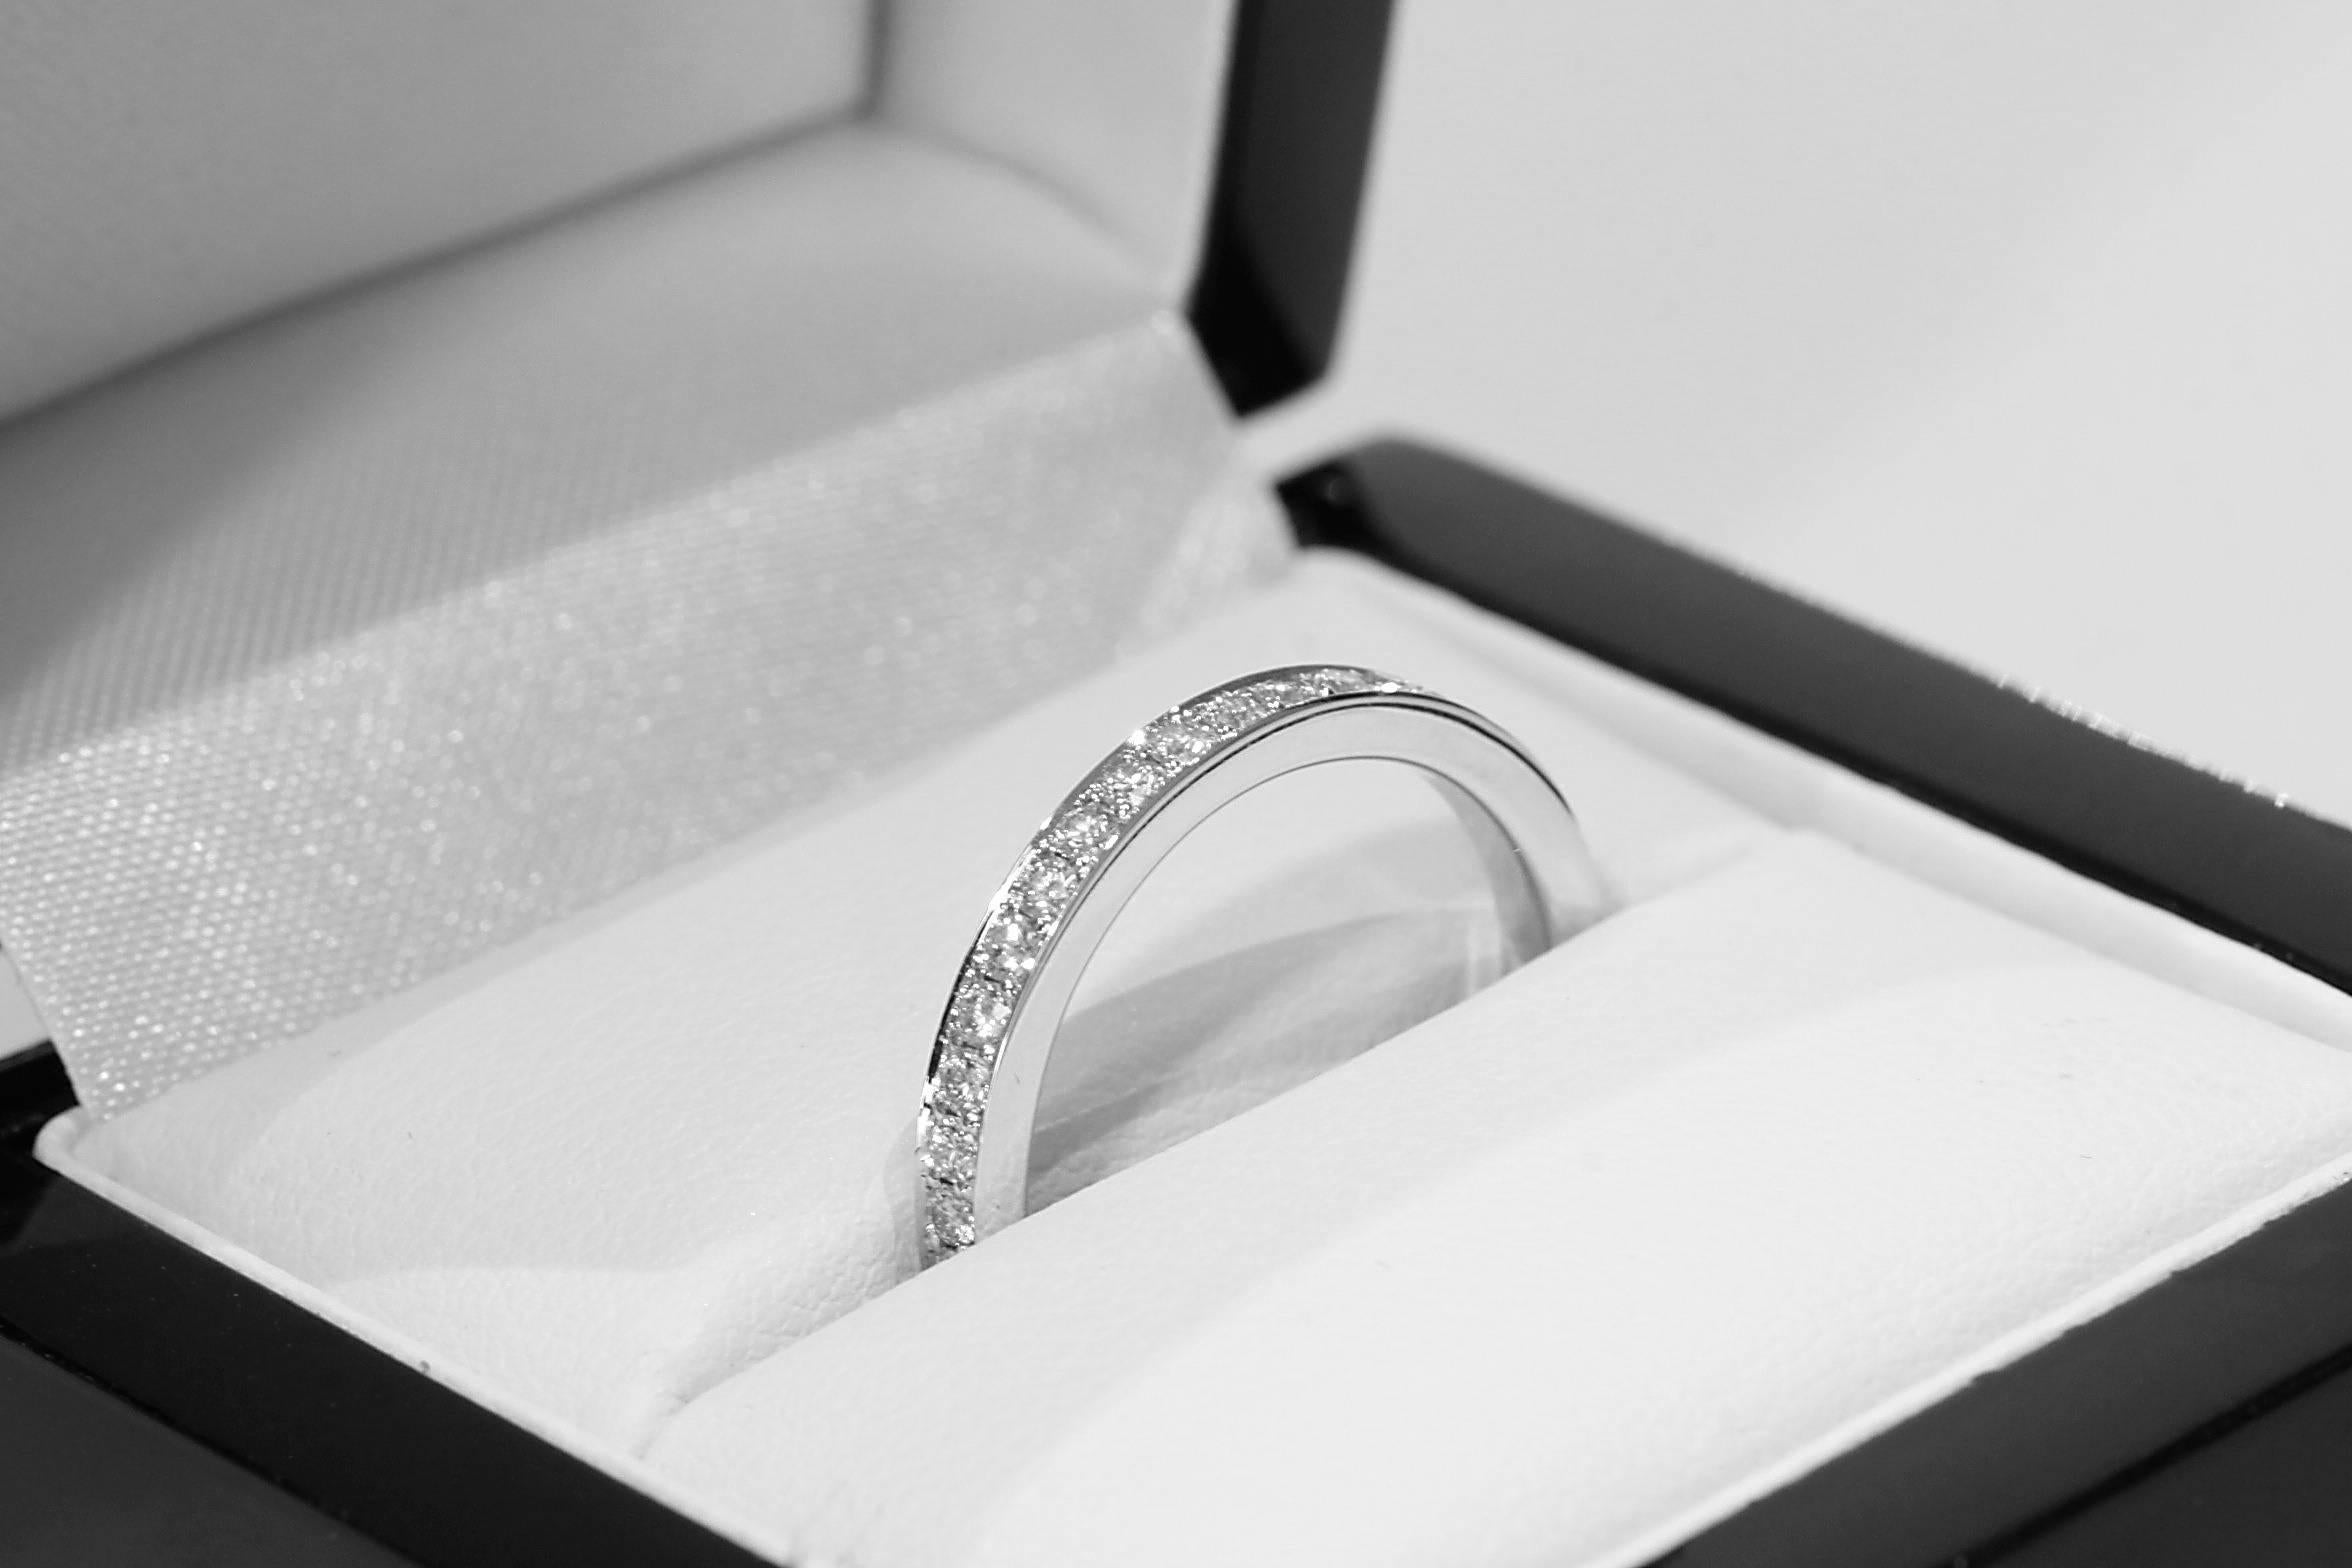 A stunning new alliance ring by Tears Undressed. This delicate 2.38 mm band is full set with white round brilliant pavé diamonds in 18 karat white gold. It contains 40 twinkling natural diamonds with a total weight of 1.20 carat. The ring is a size